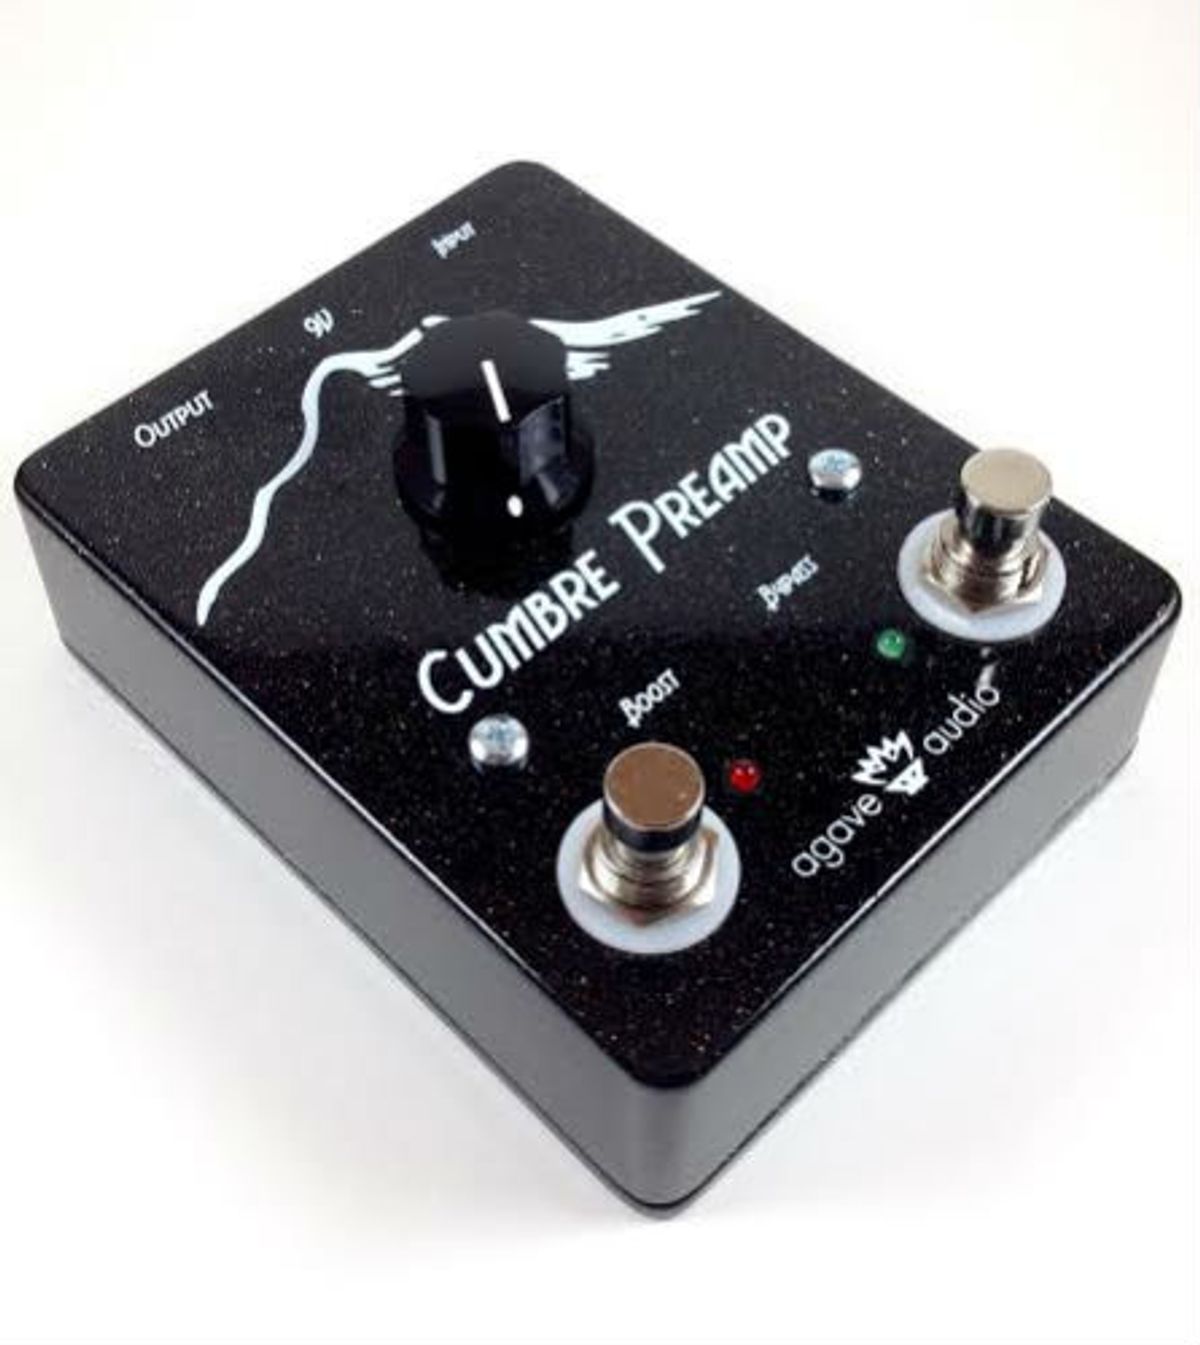 Agave Audio Introduces the Cumbre Preamp